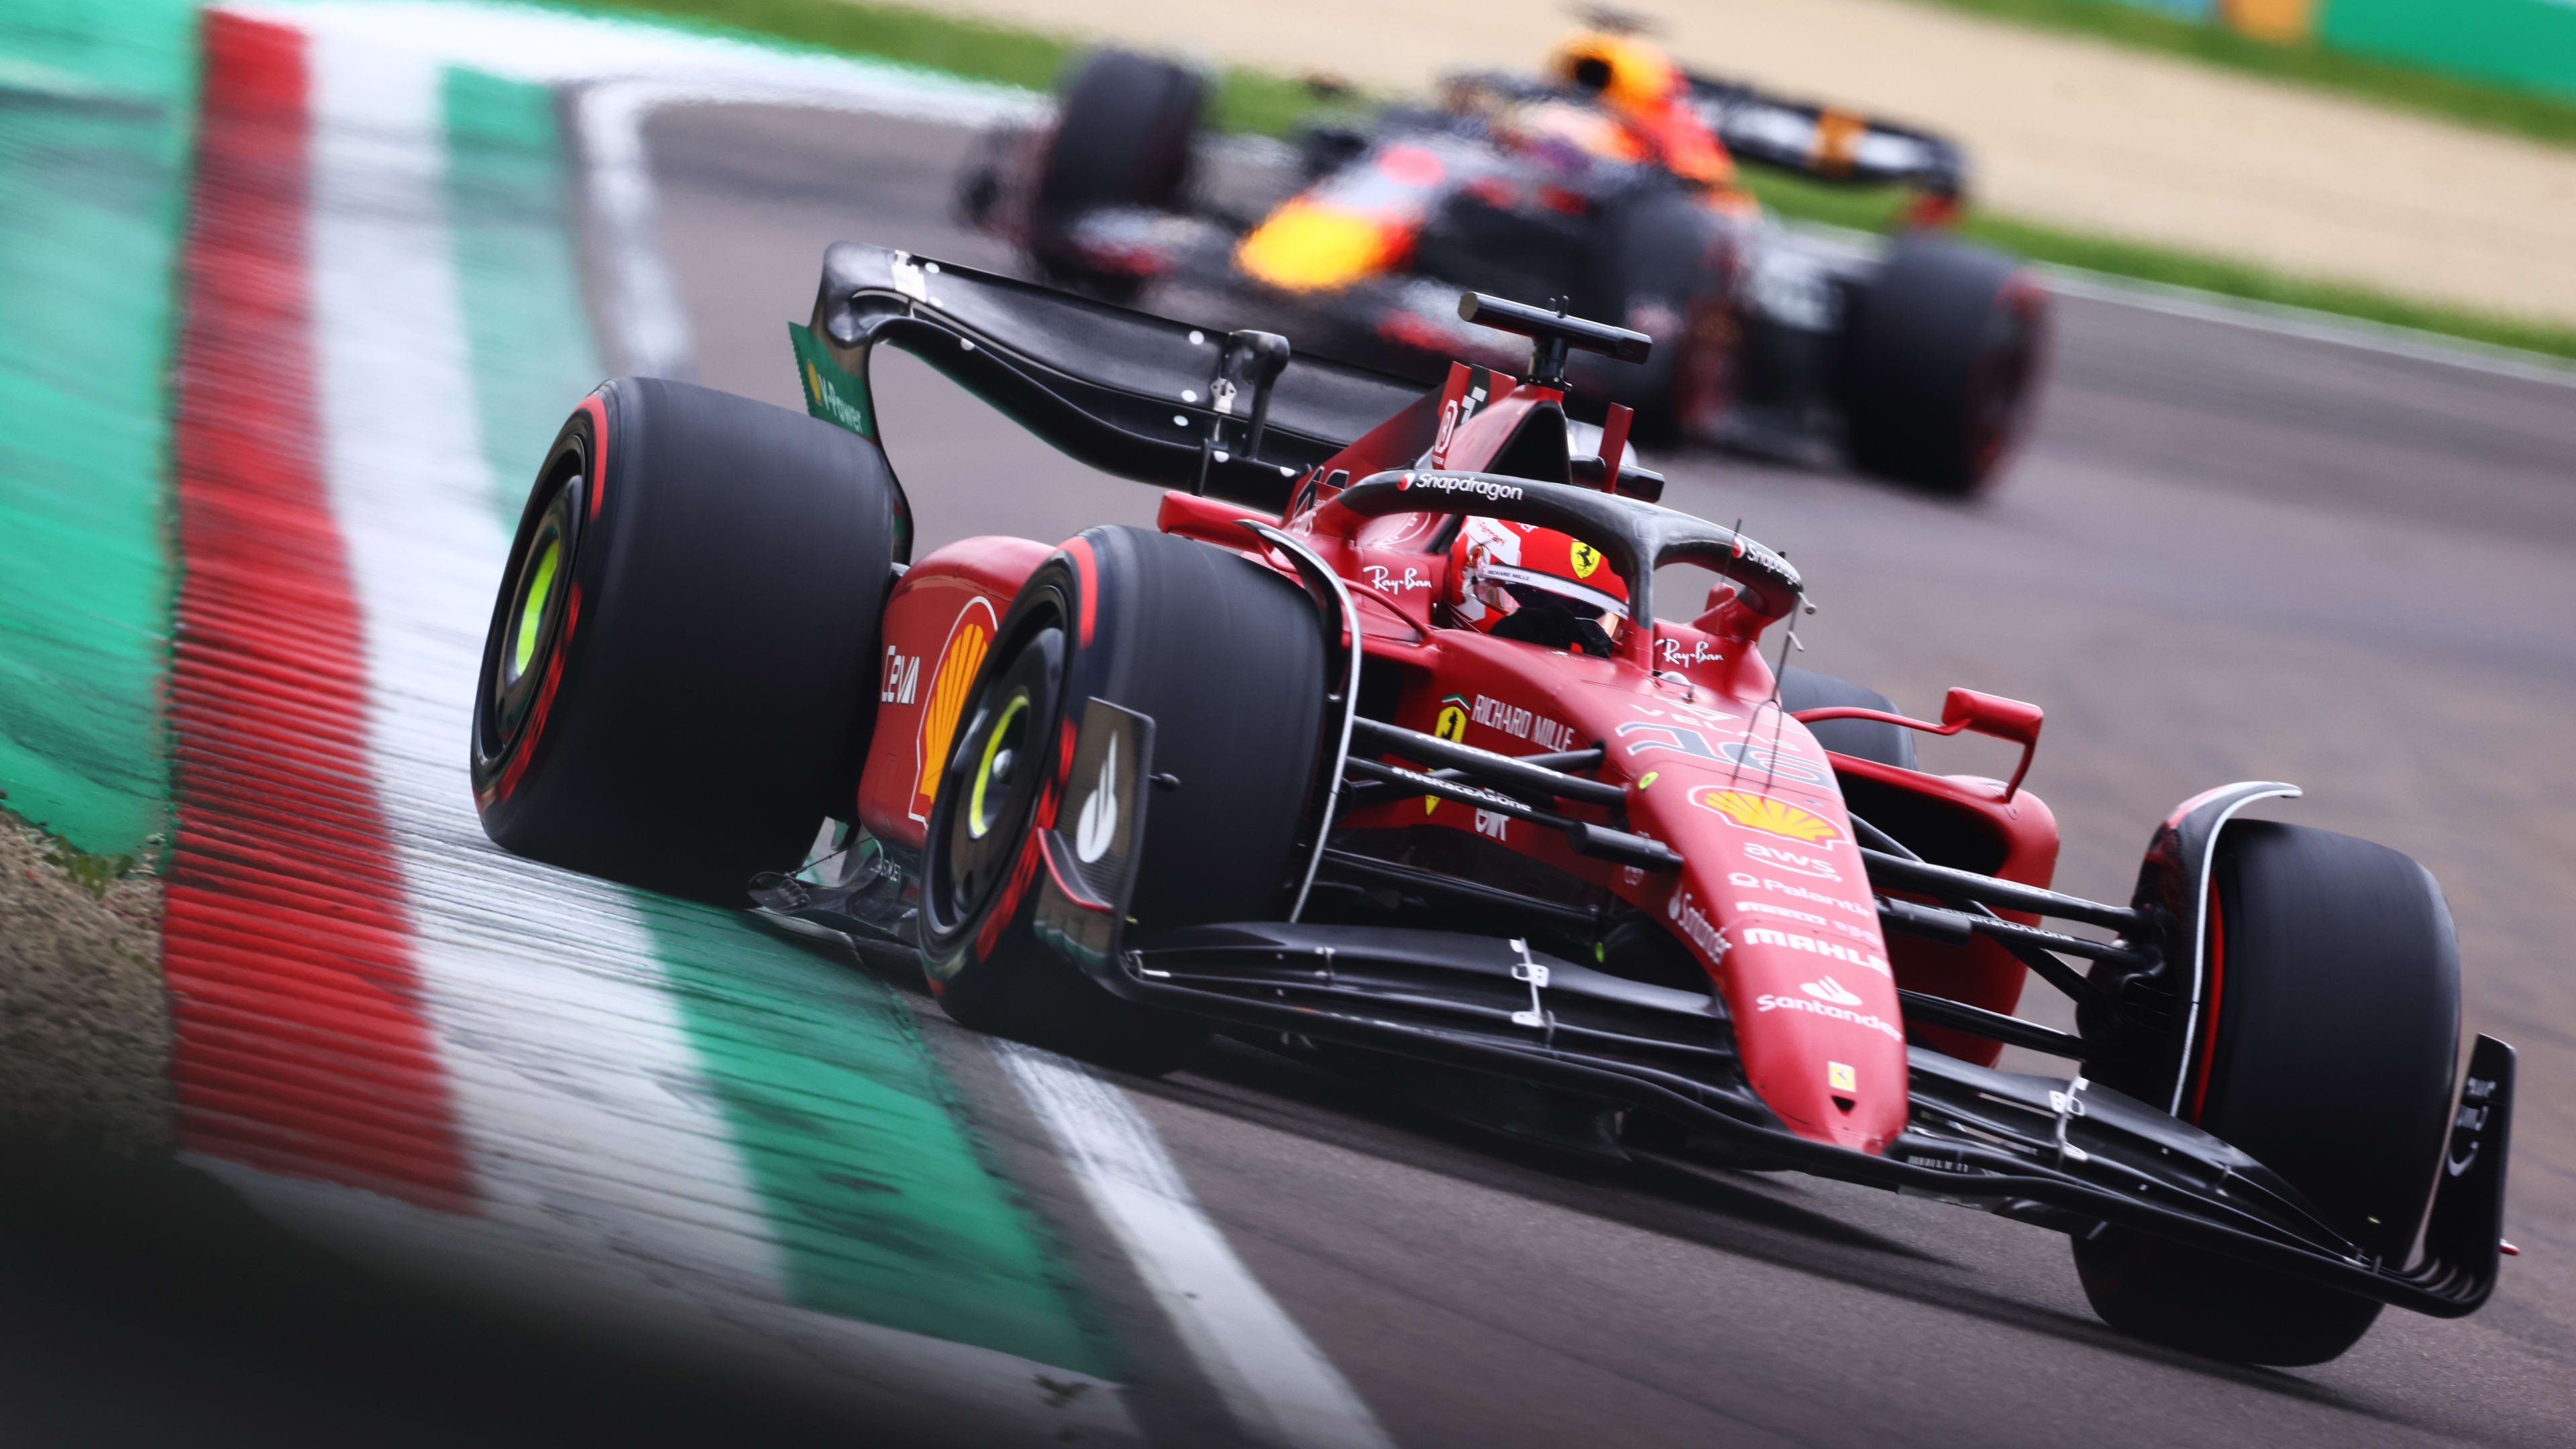 If we can fix it, we can fight for the win' – Leclerc reveals key struggle  after losing Imola Sprint to Verstappen | Formula 1®